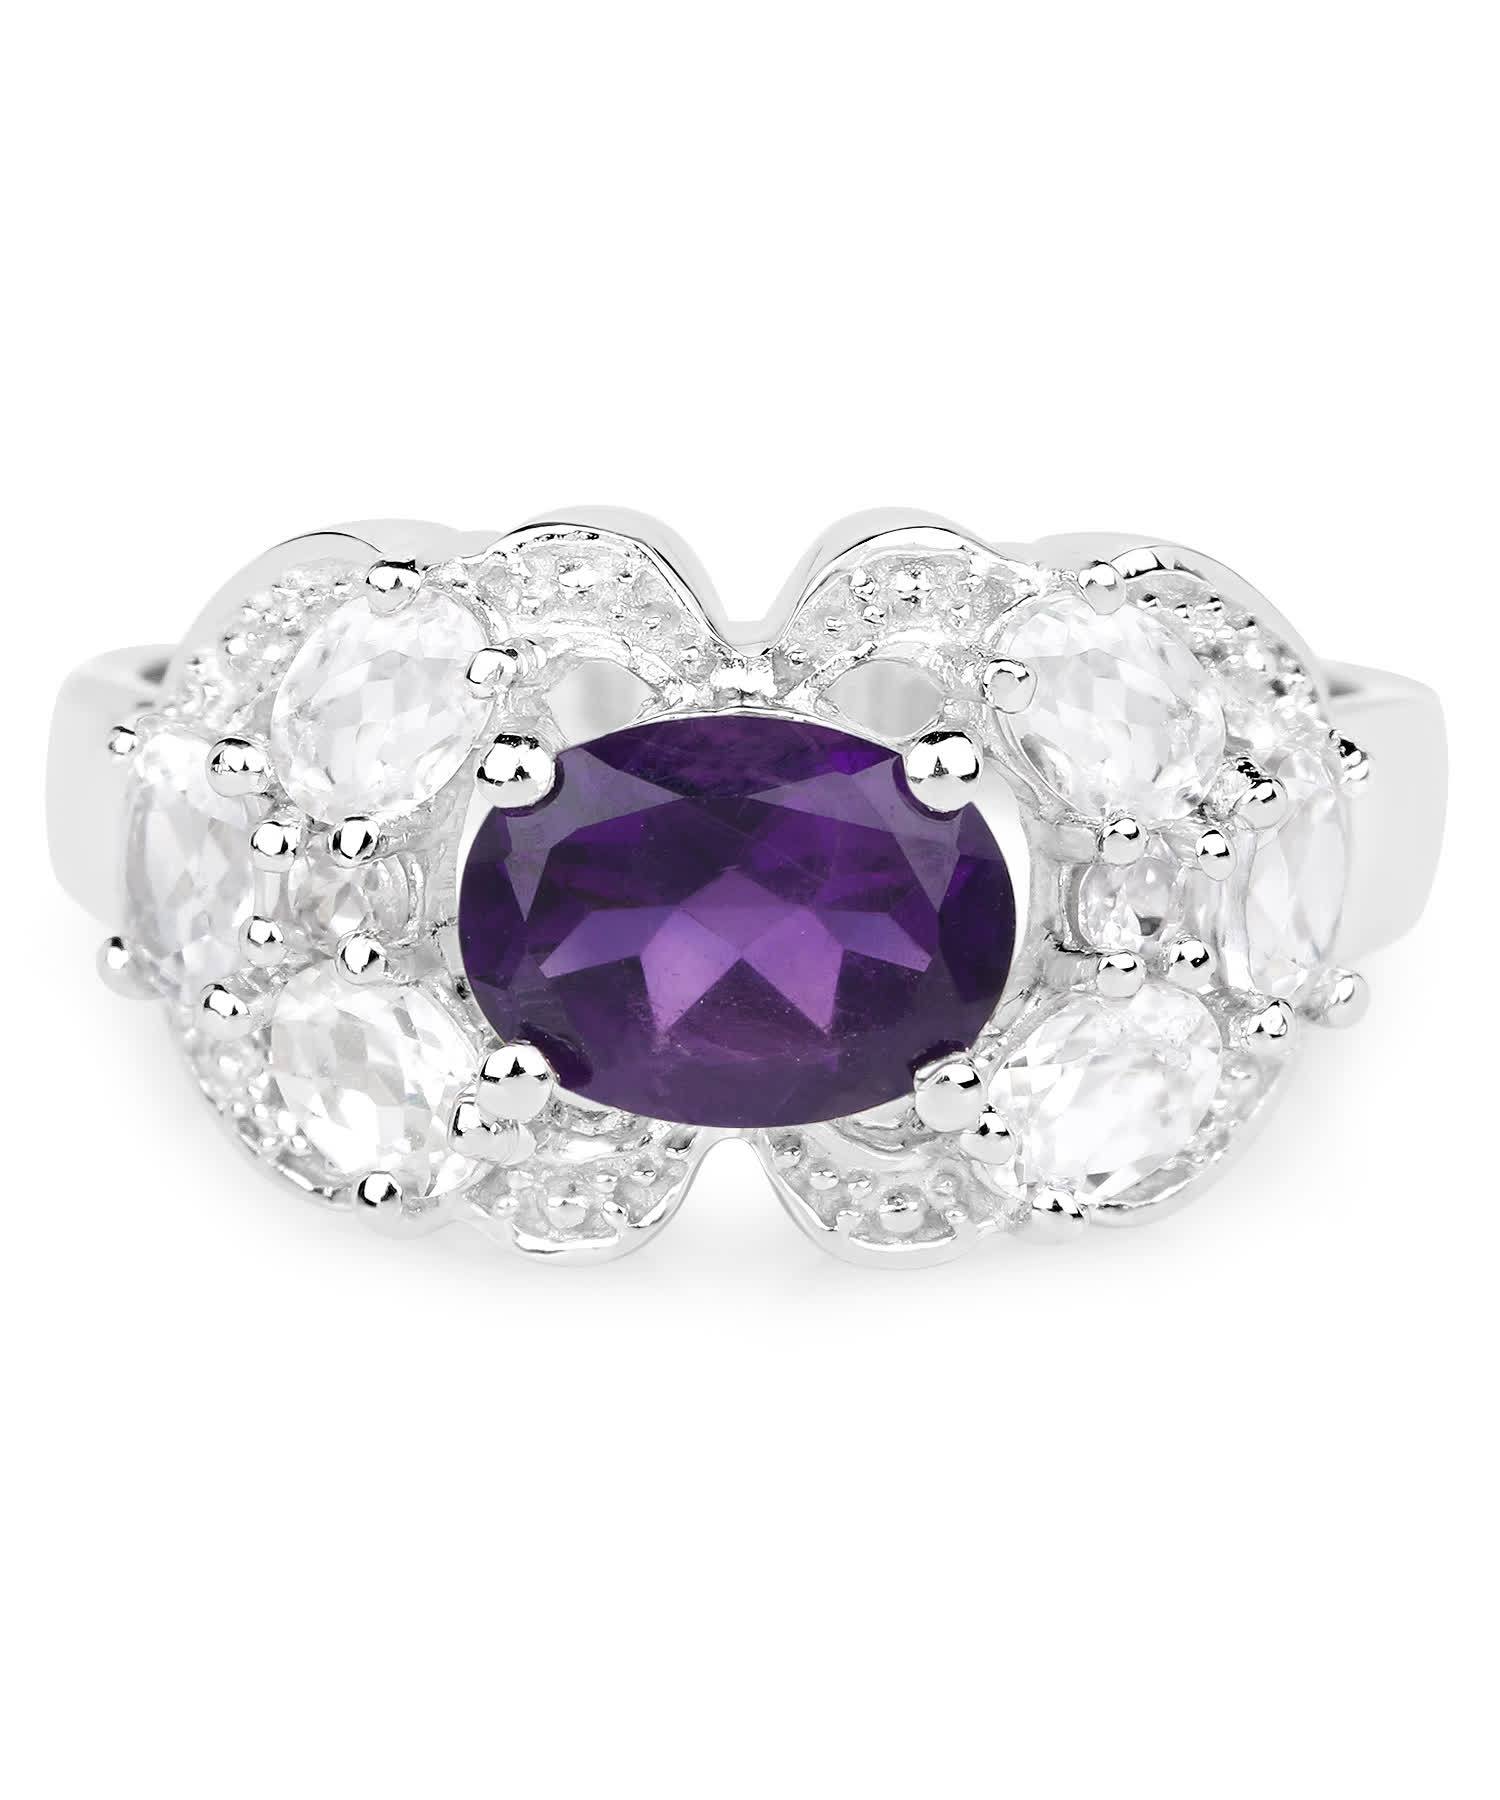 2.75ctw Natural Amethyst and Zircon Rhodium Plated 925 Sterling Silver Ring View 3